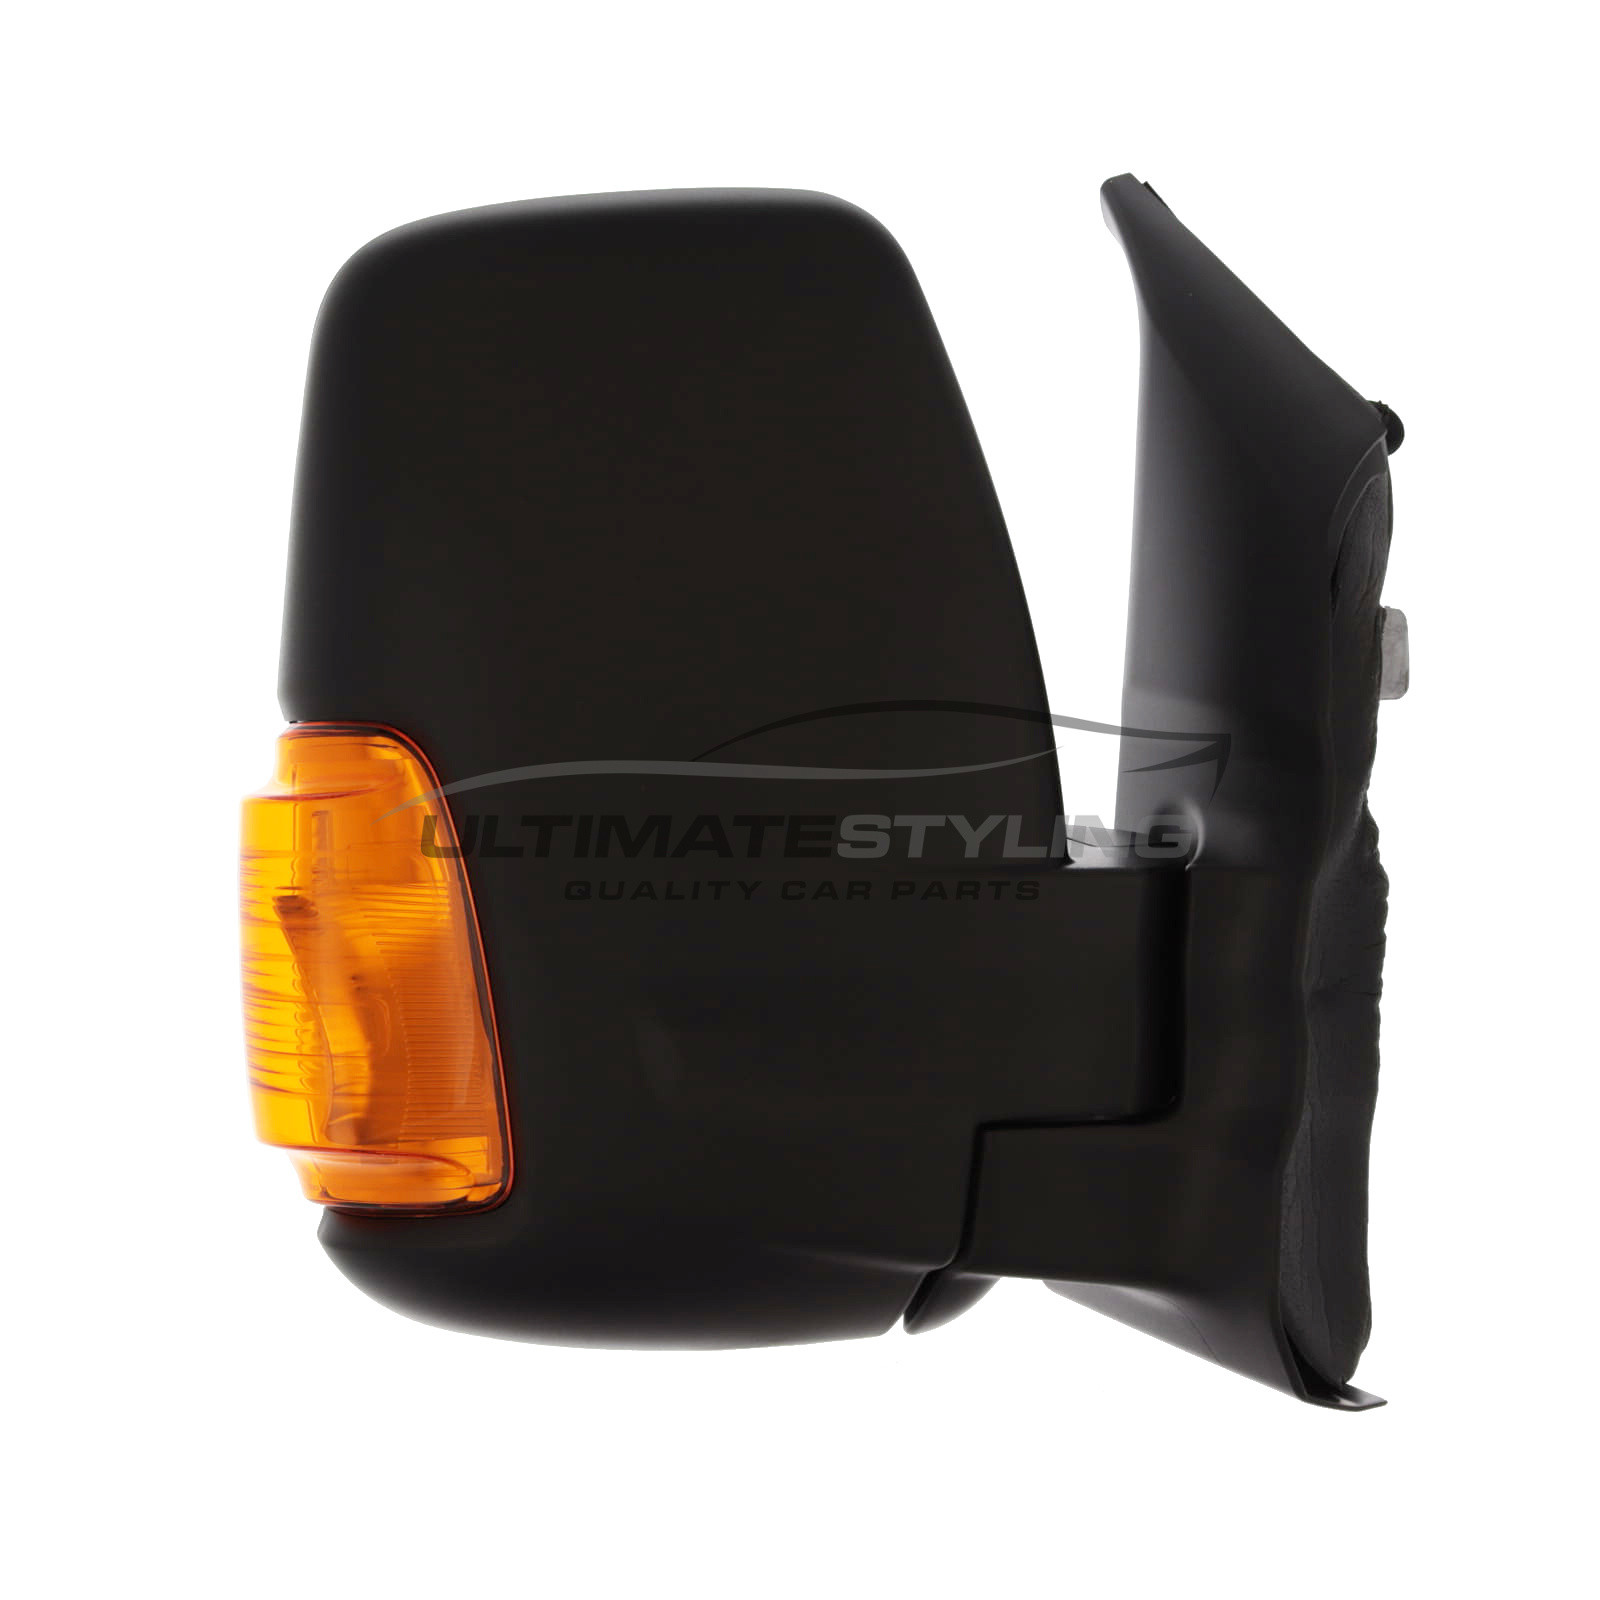 Ford Transit Wing Mirror / Door Mirror - Drivers Side (RH) - Electric adjustment - Heated Glass - Indicator - Black - Textured